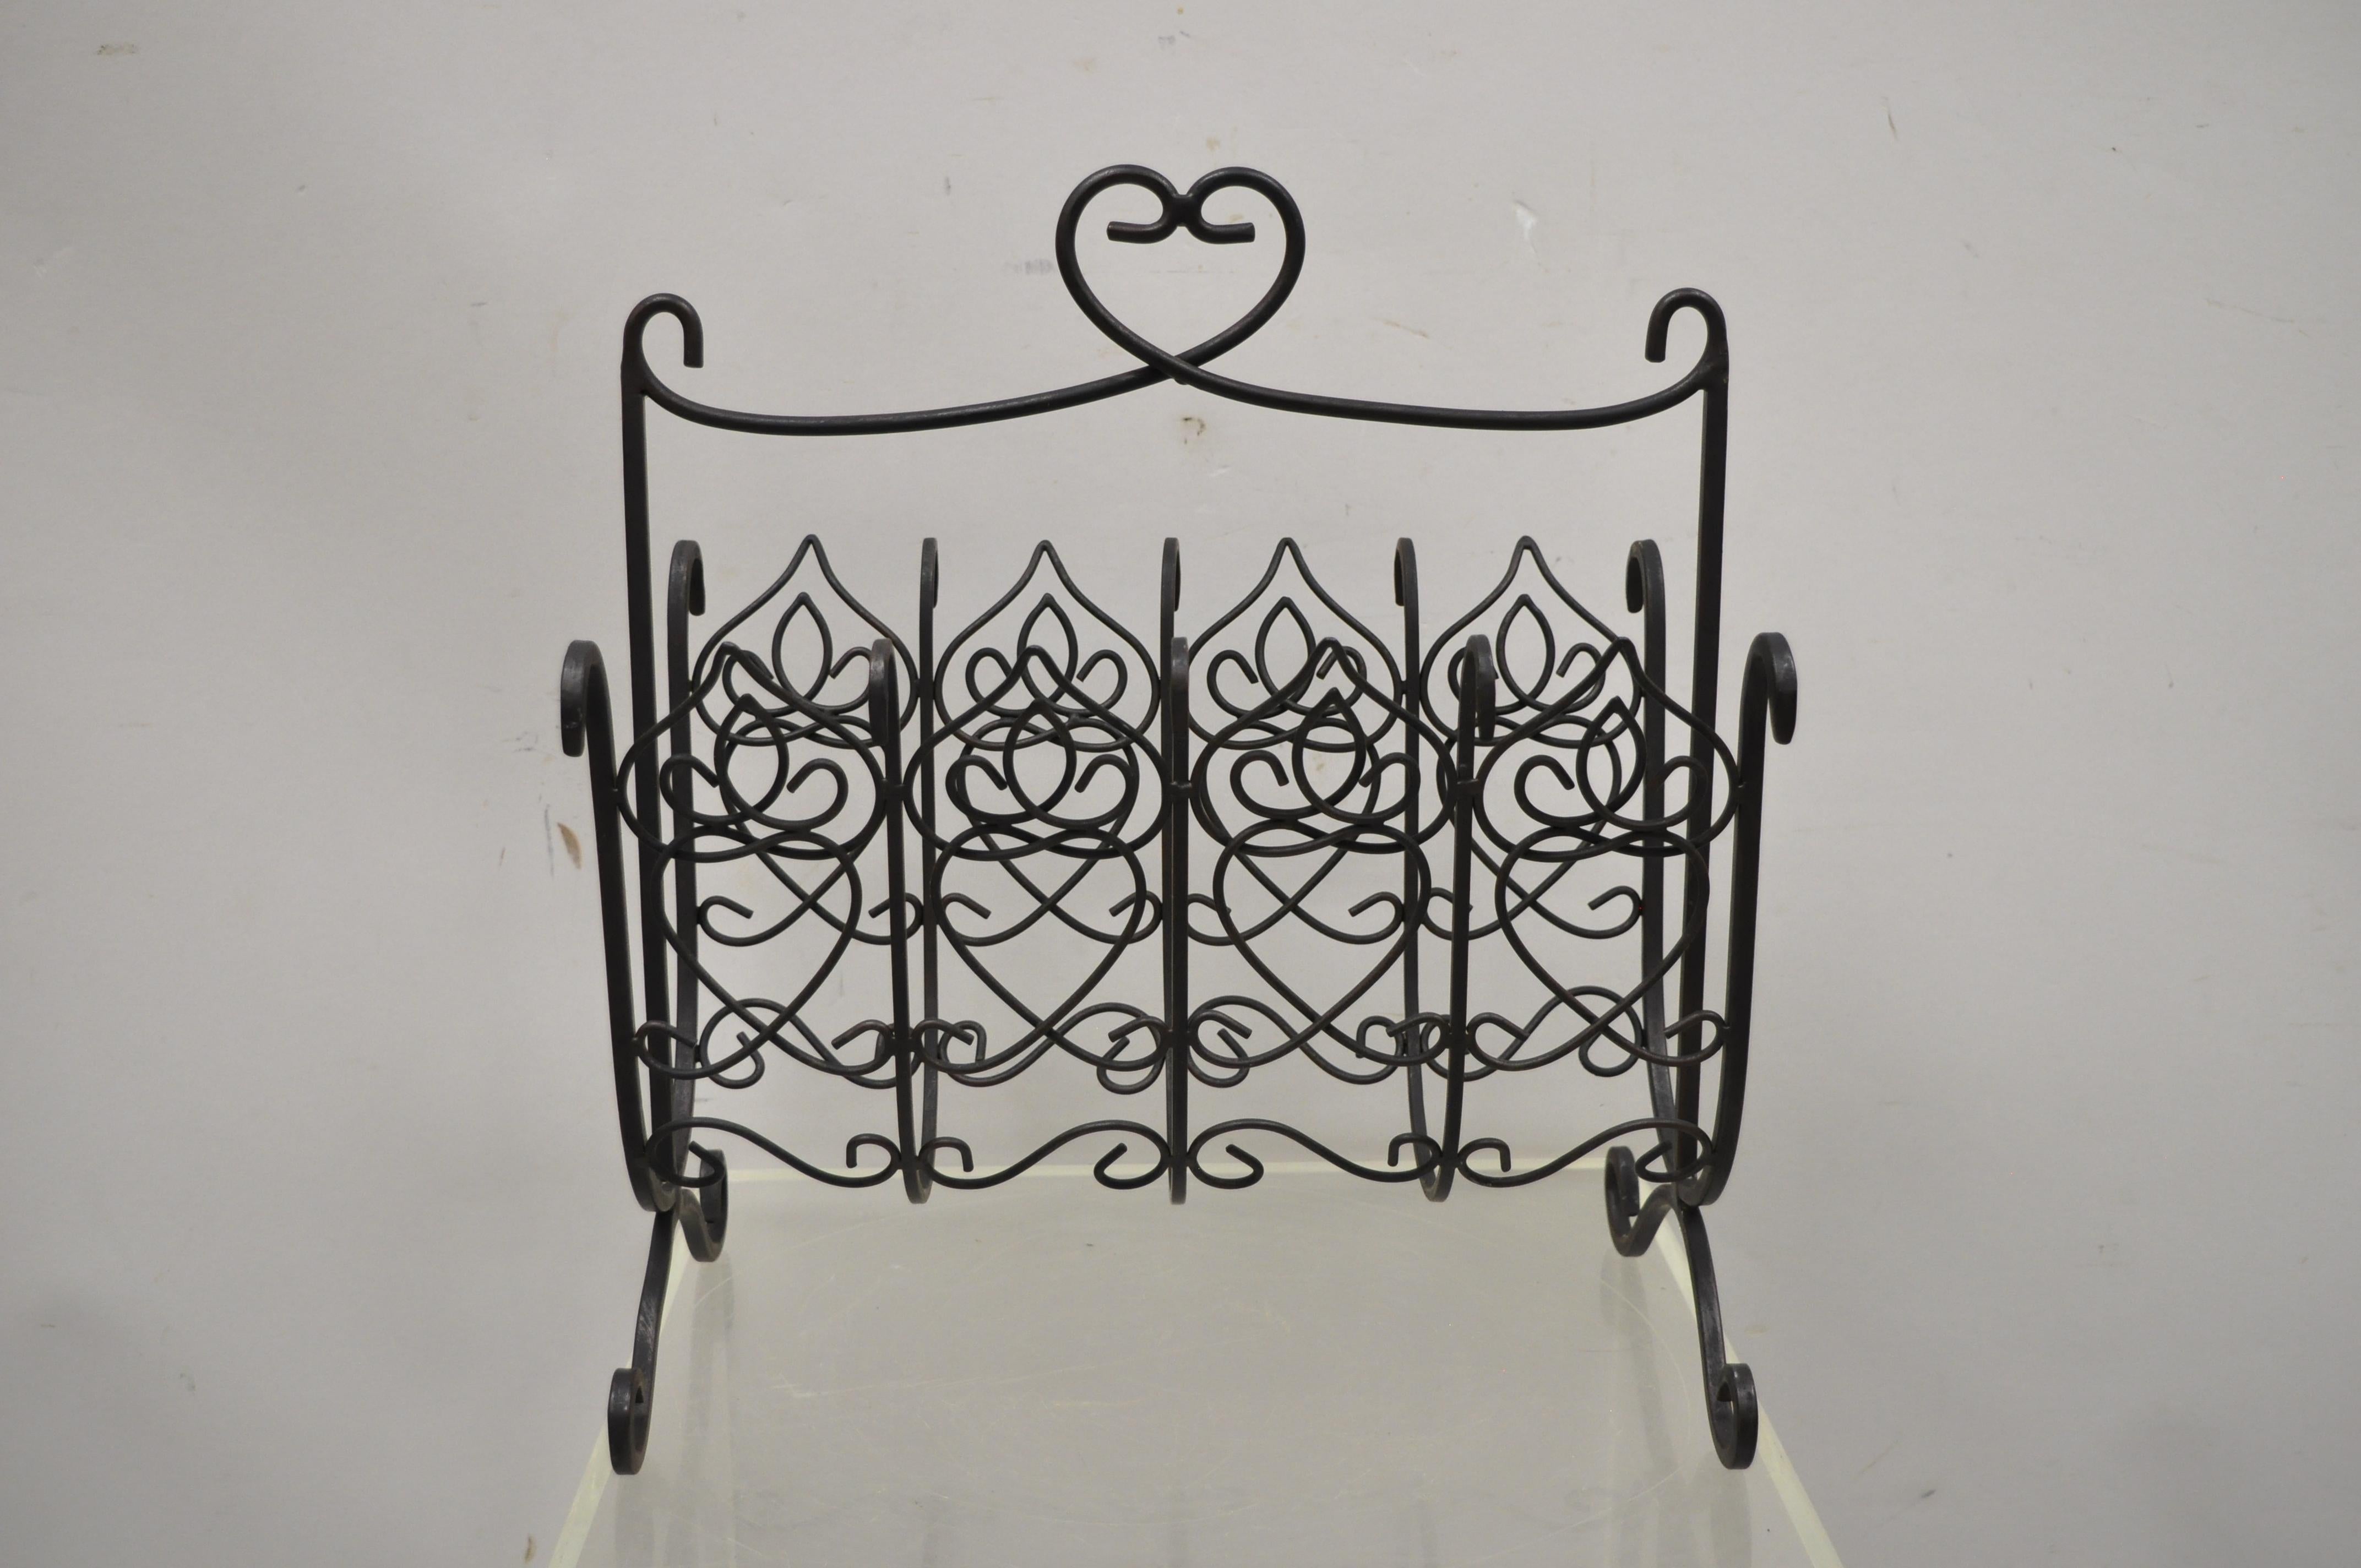 French style scrolling wrought iron magazine rack stand with heart. Item features a scrolling wrought iron frame, heart design, great style and form. Circa late 20th century. Measurements: 16.75